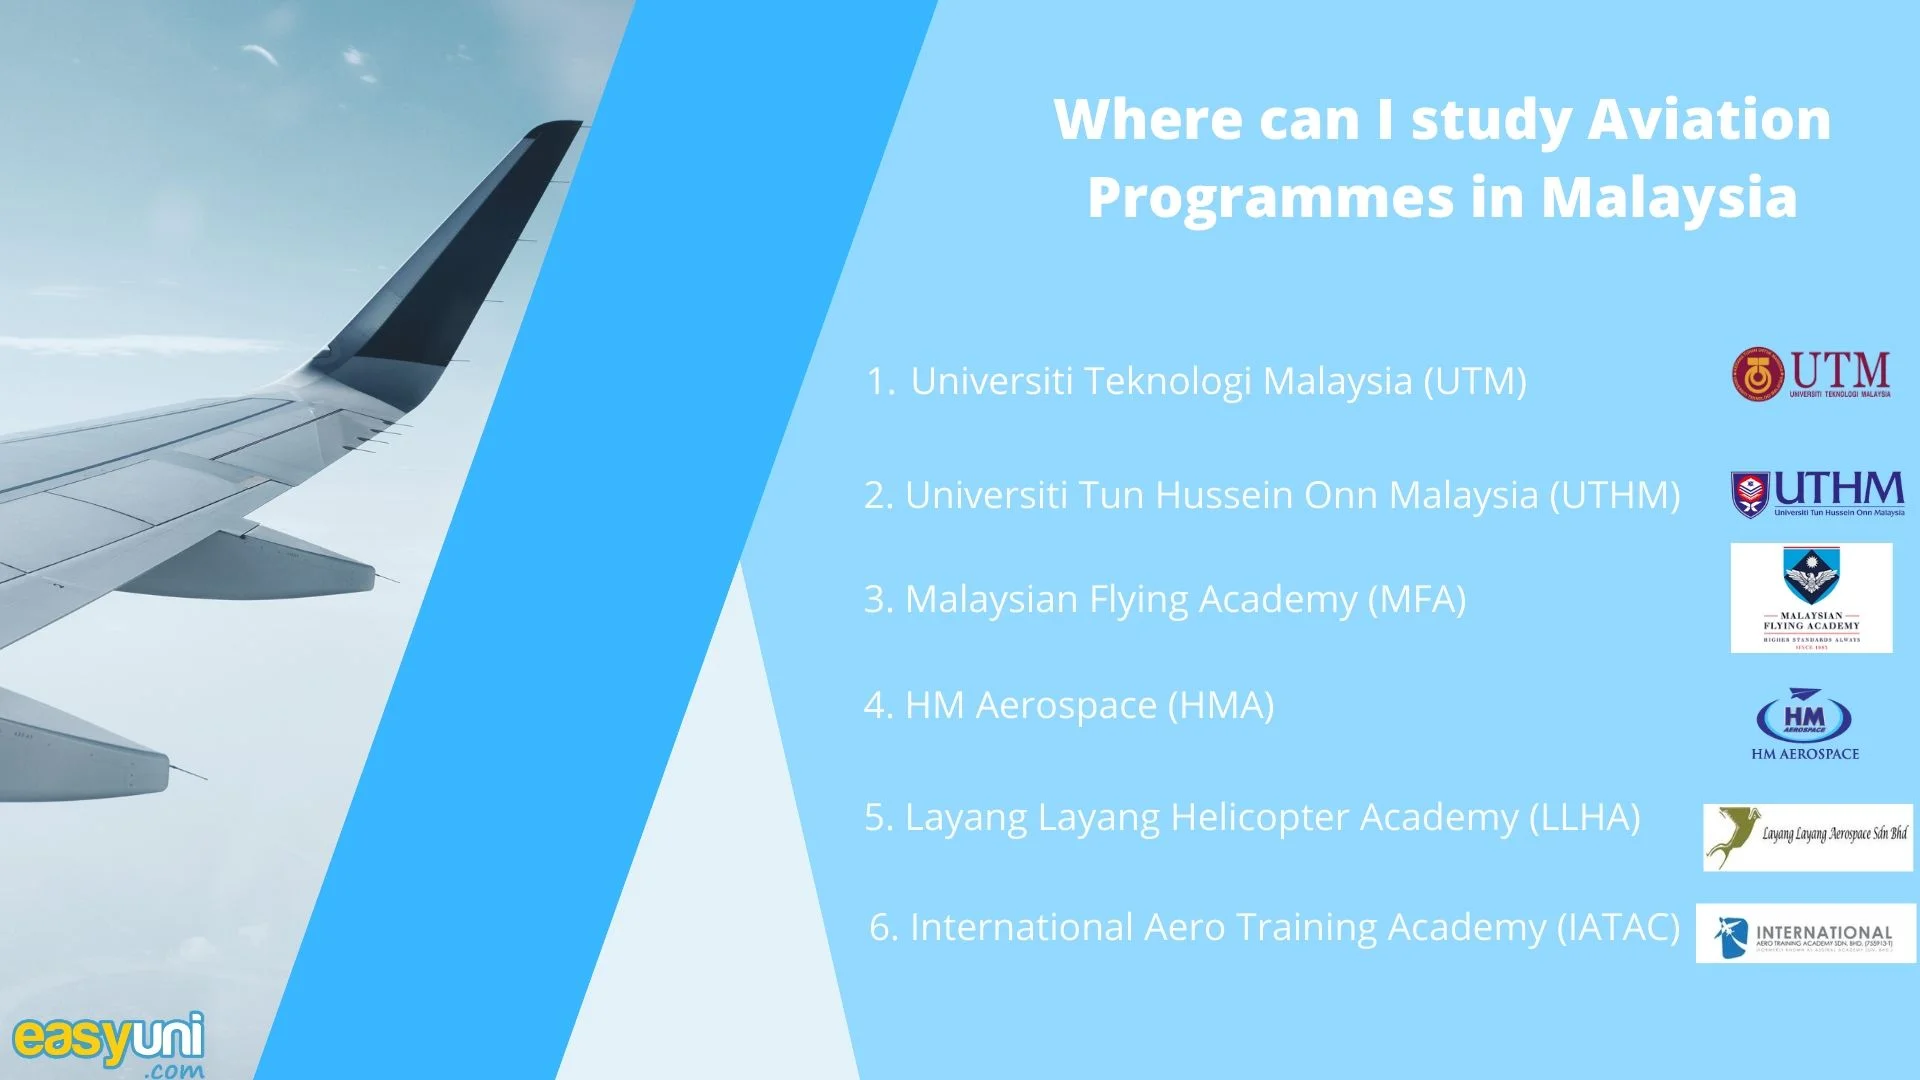 Places that offer Aviation Programmes in Malaysia.